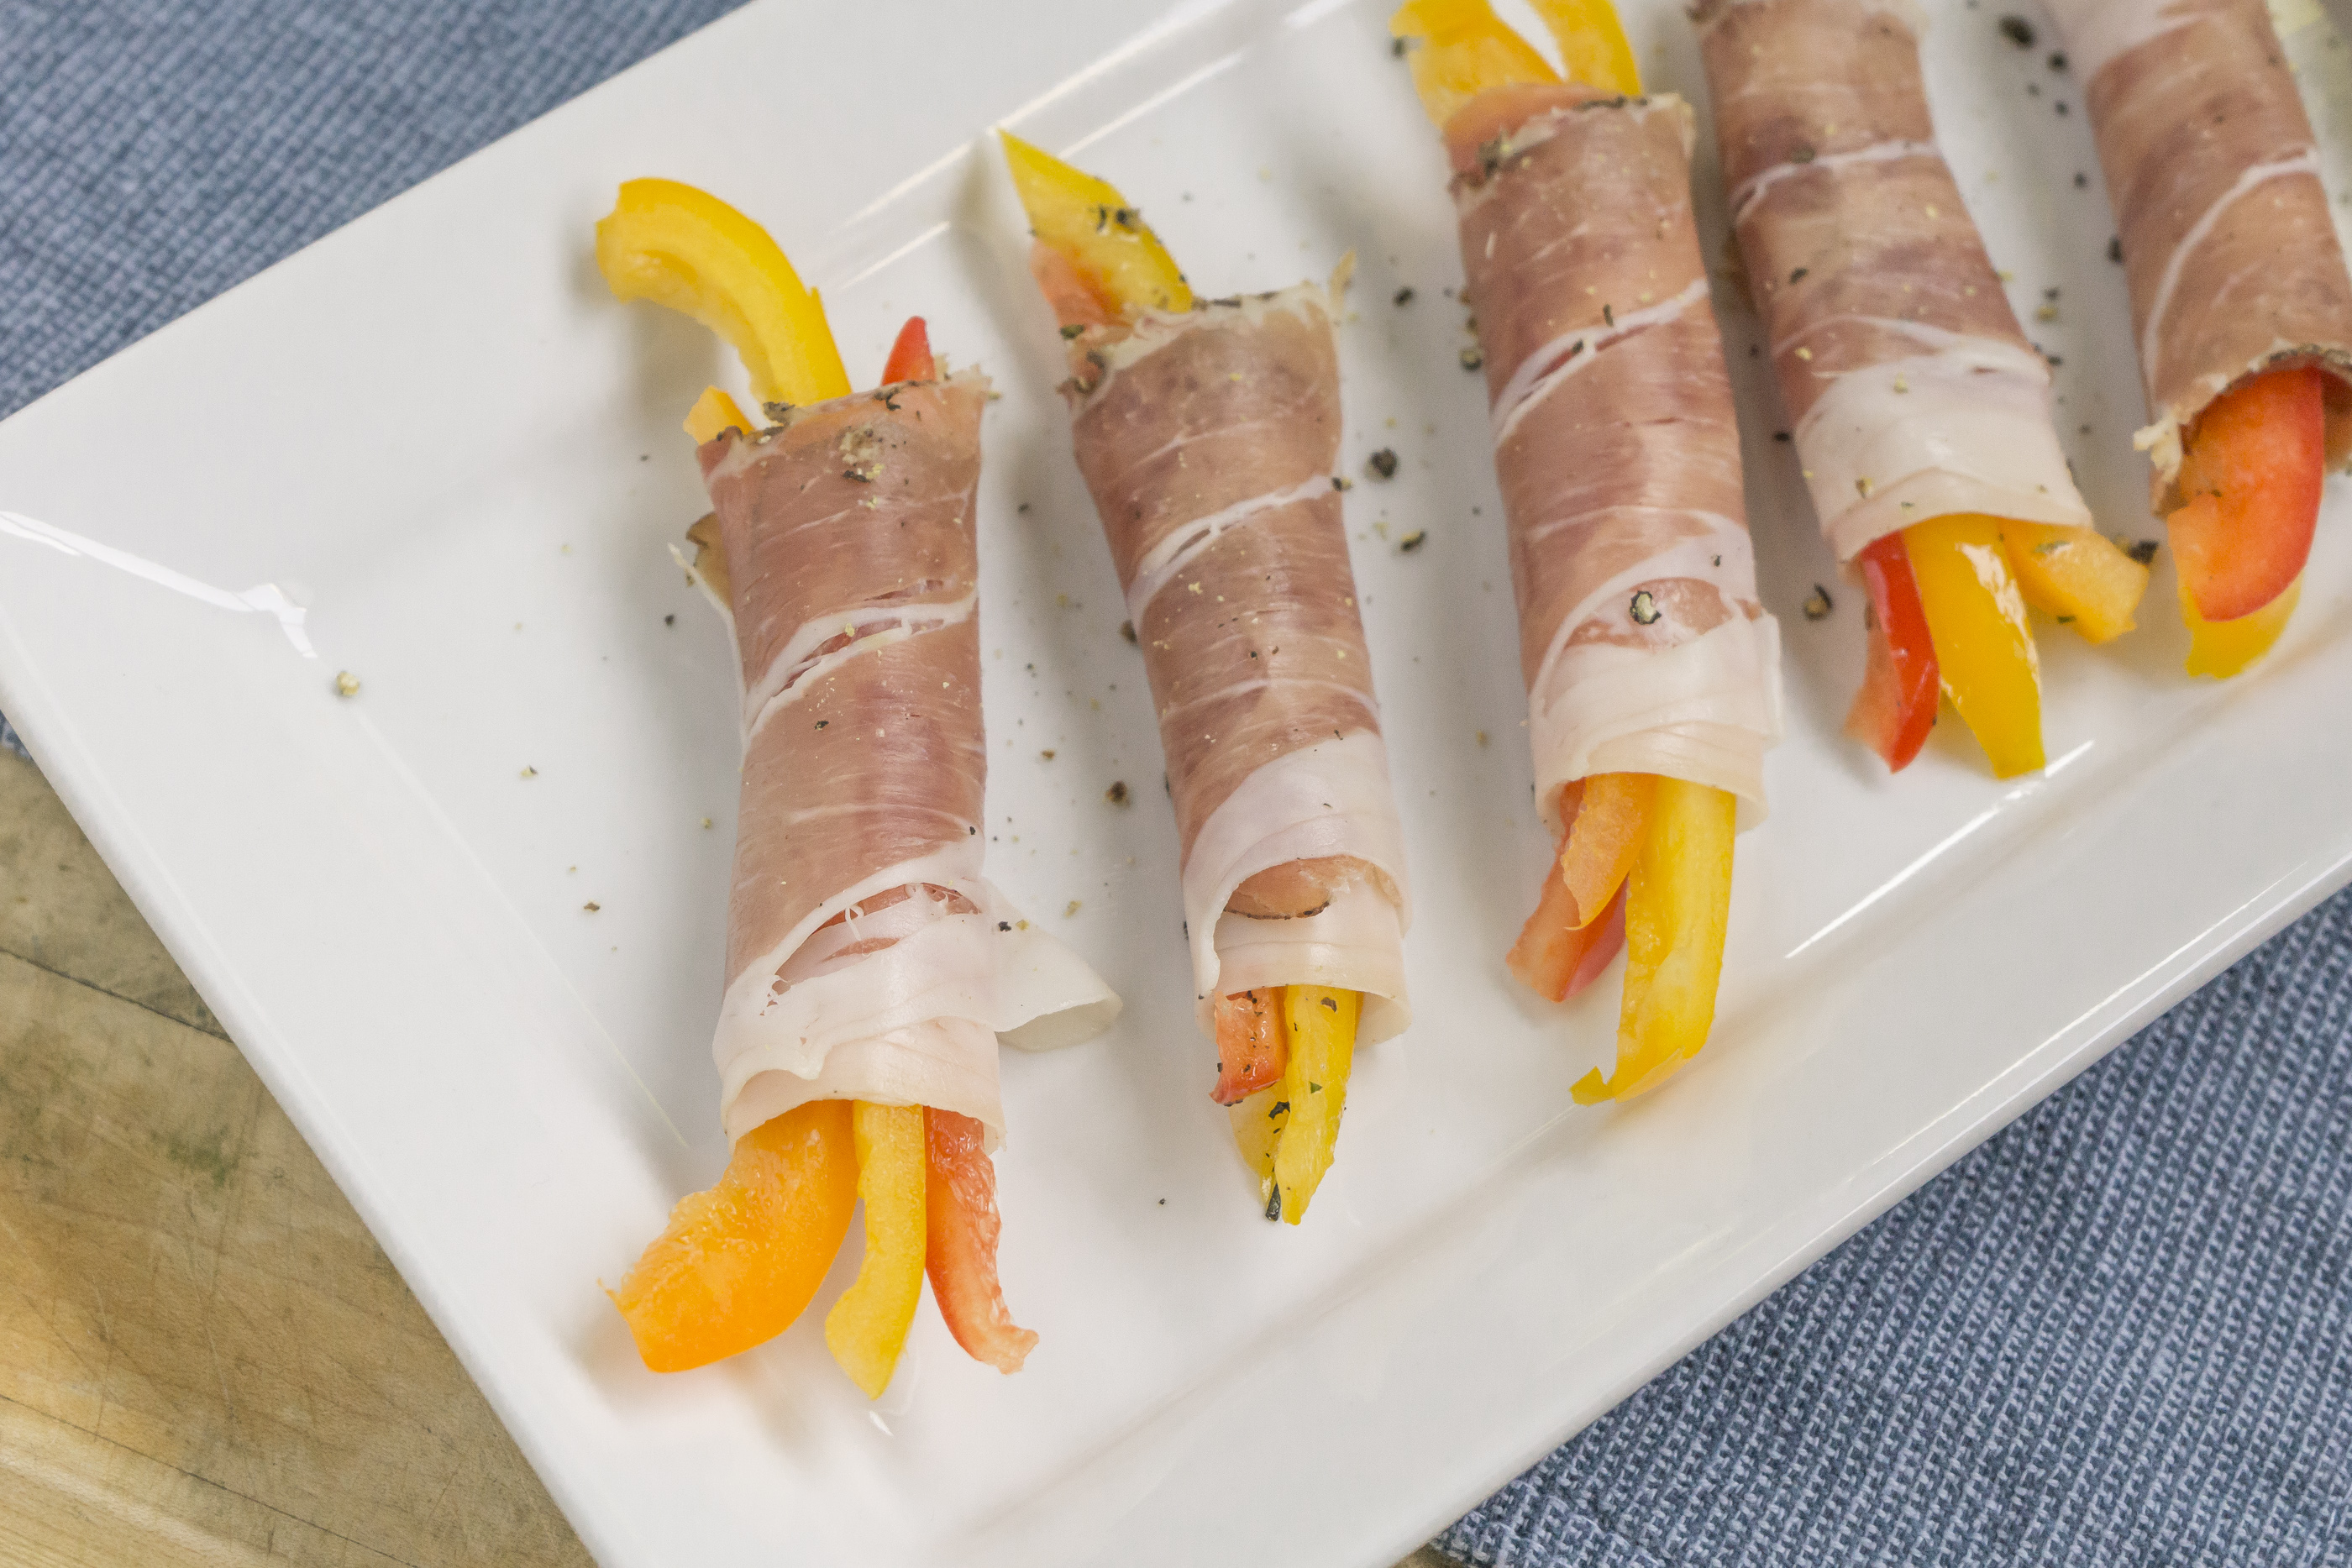 An incredibly easy appetizer to make, while still tasting amazing. A fun kitchen project for you and the kids to enjoy!!